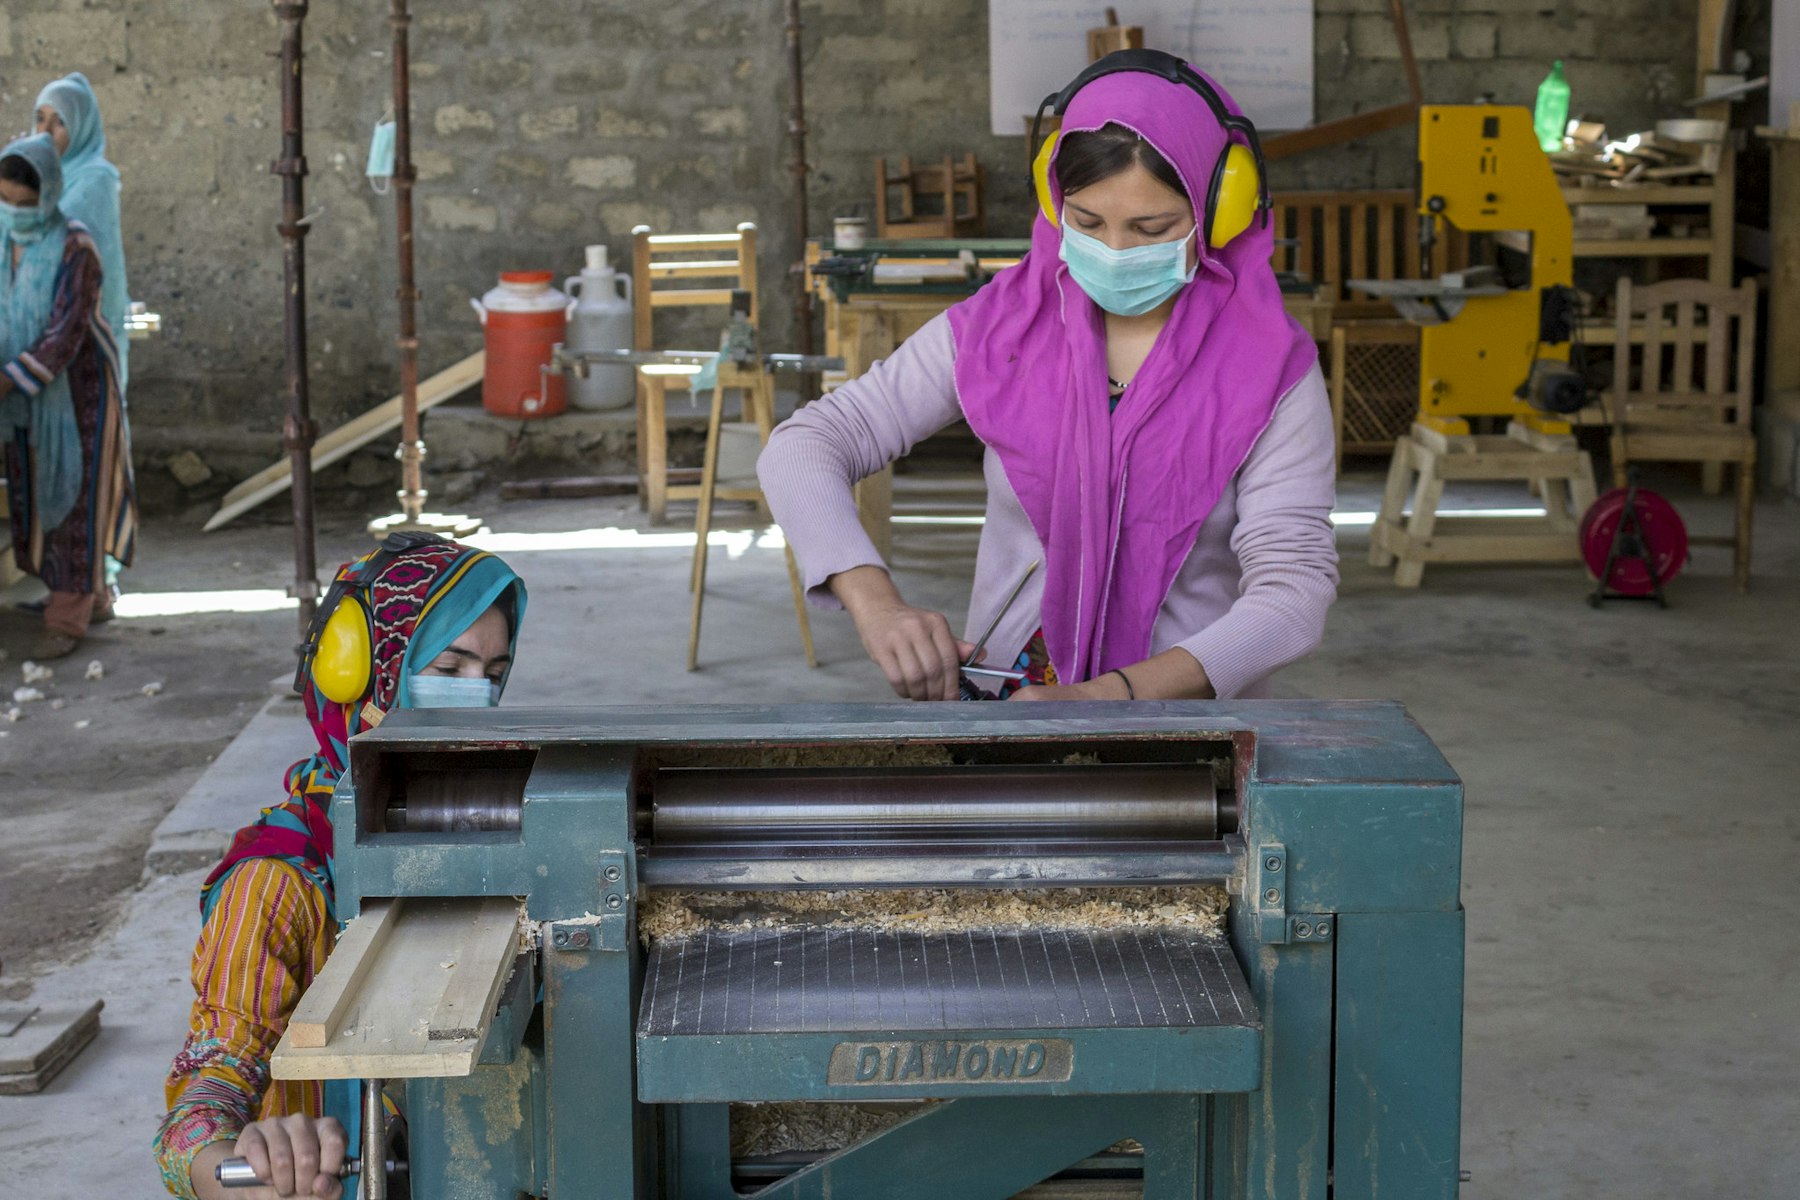 A member of CIQAM, an all-women carpentry business in Pakistan.